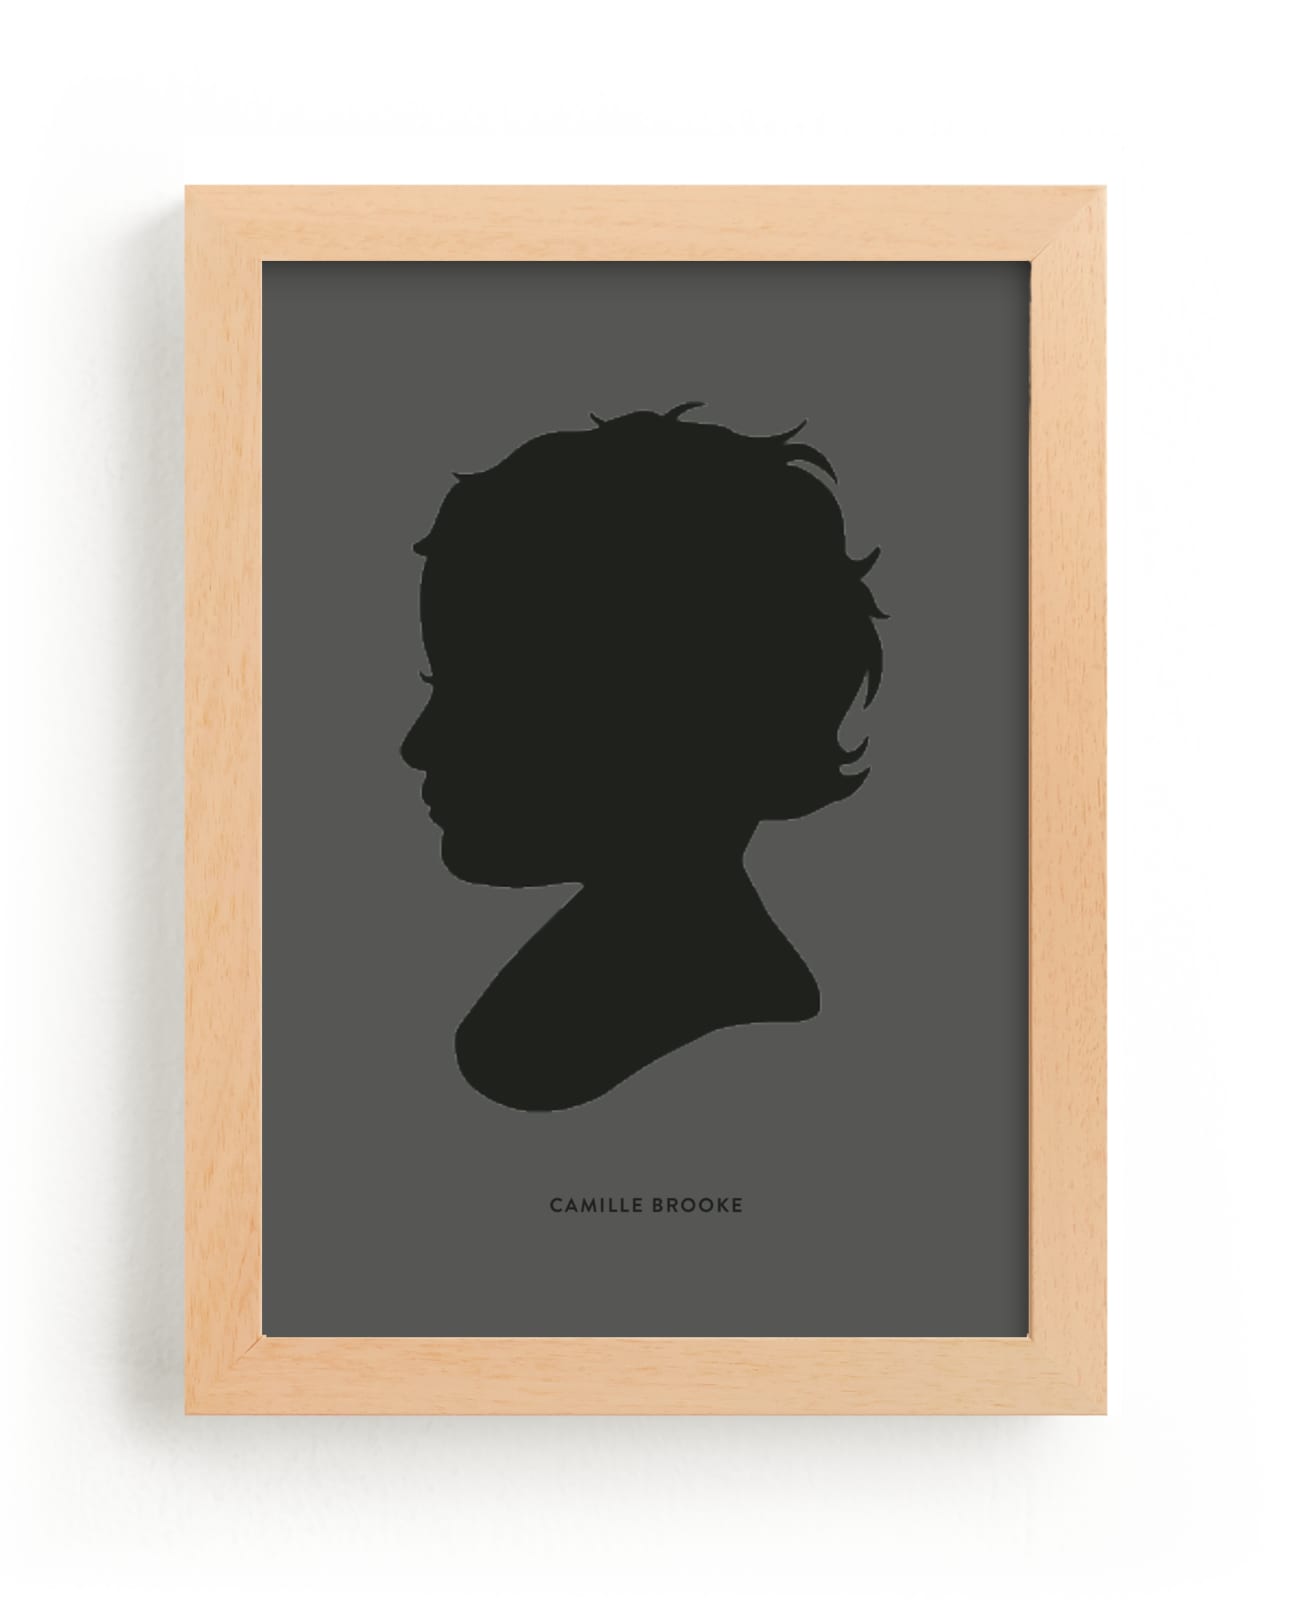 This is a colorful, black silhouette art by Minted called Tone on Tone Silhouette.